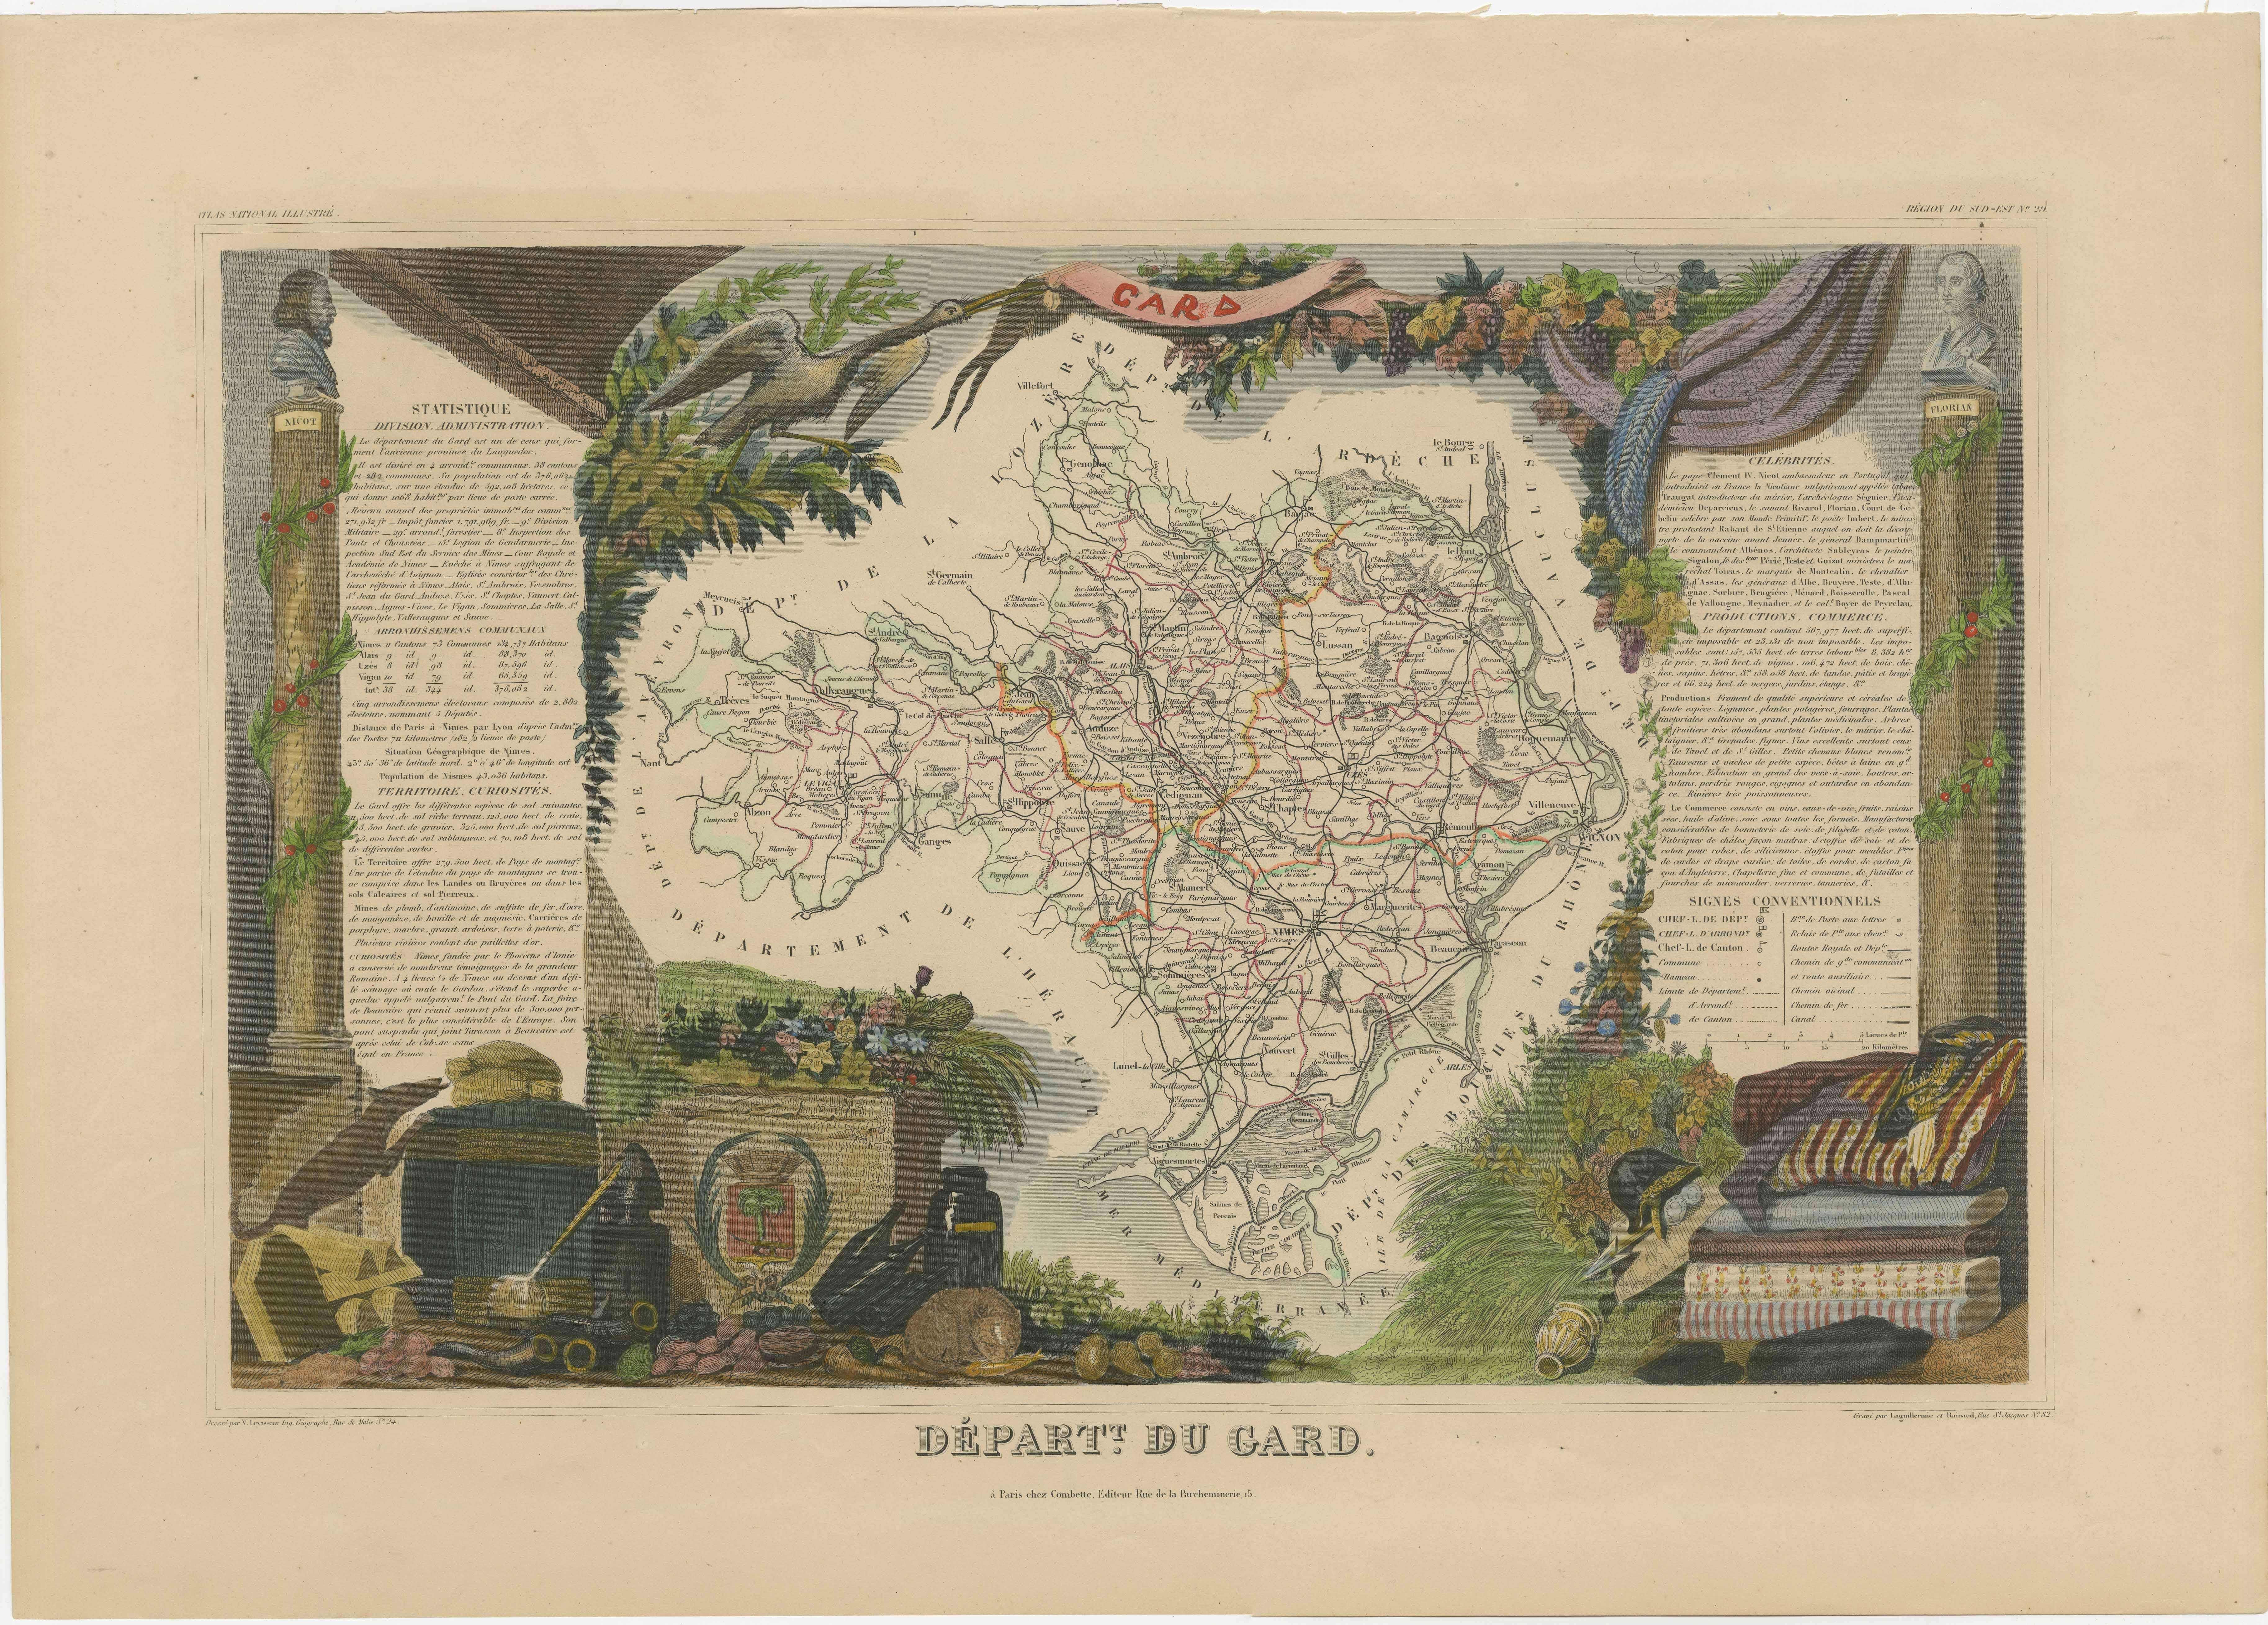 Antique map titled 'Départ. Du Gard'. Map of the French department of Gard, France. This area of France is known mainly for its red wine and production of Bleu des Causses, a soft and savory cheese. The whole is surrounded by elaborate decorative